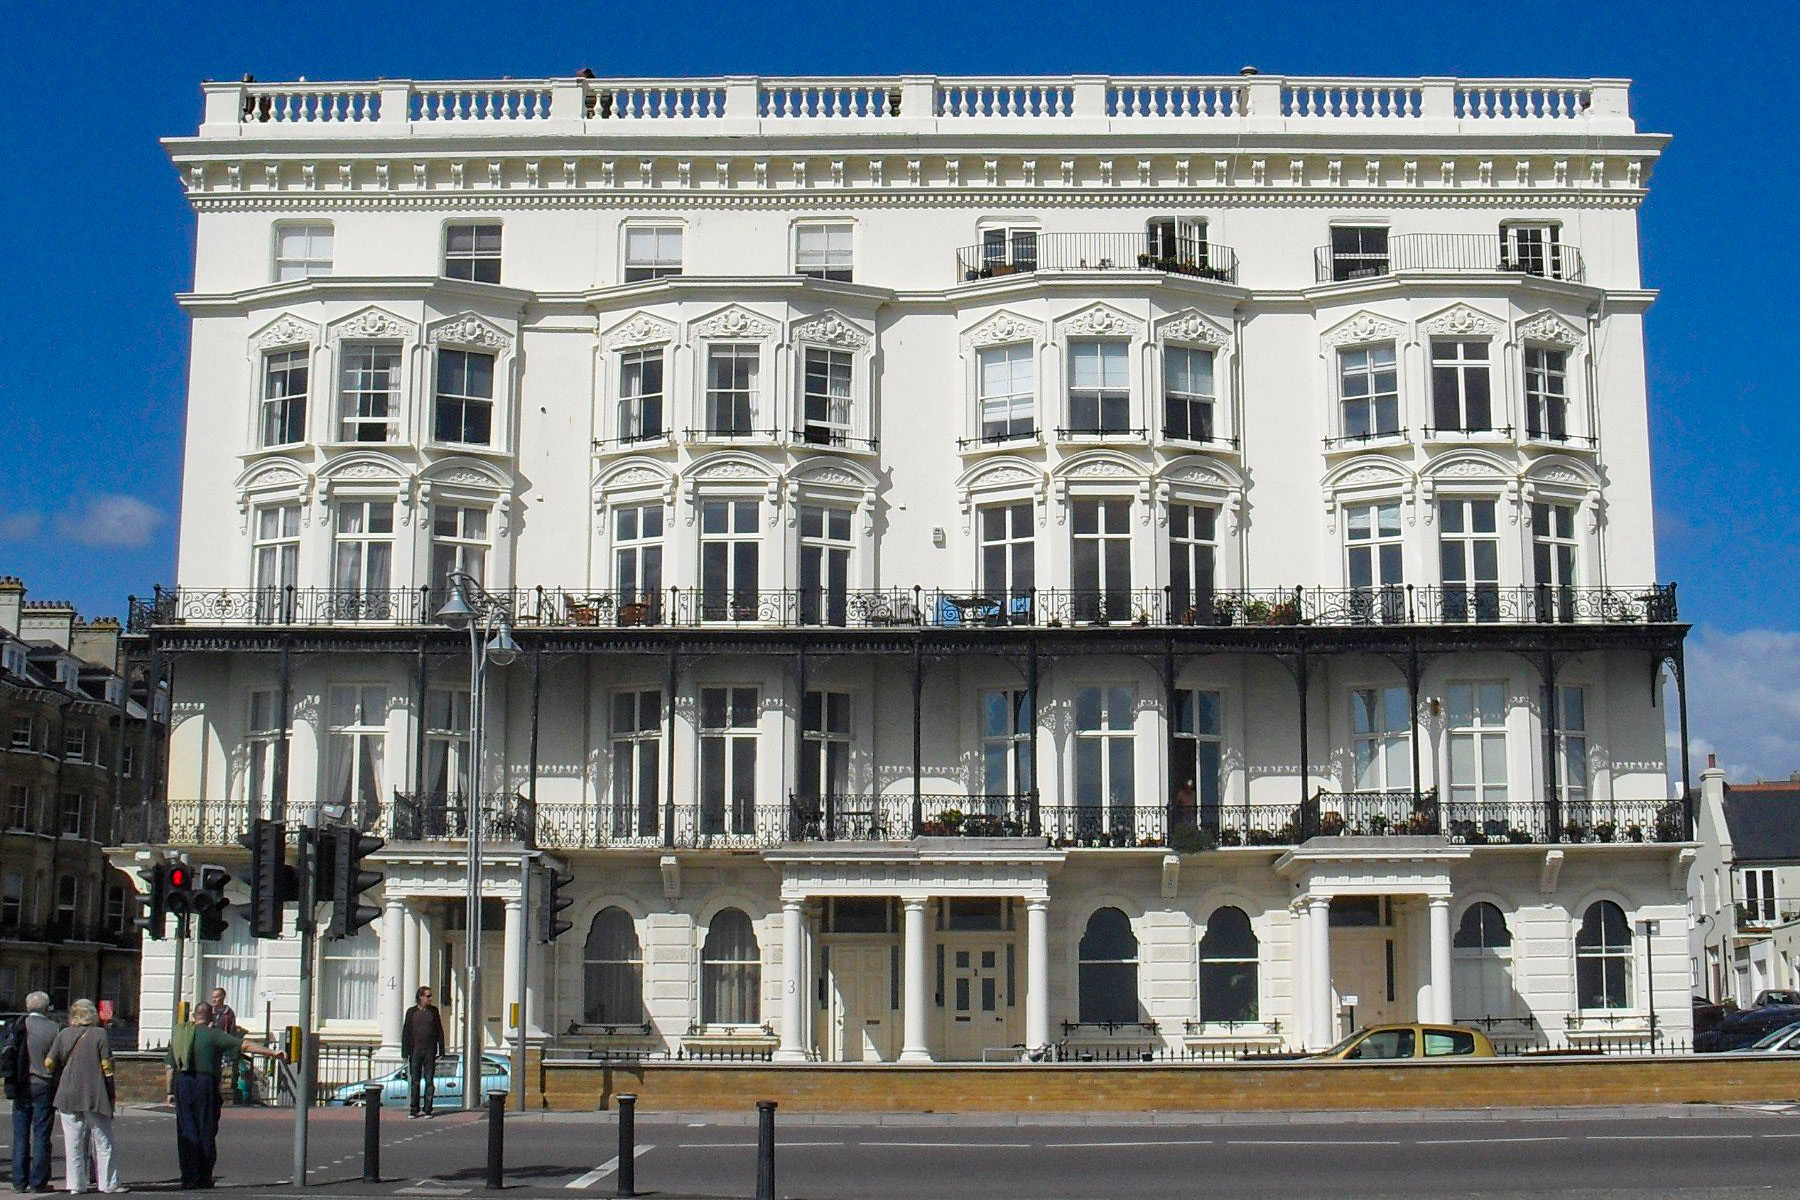 Adelaide Mansions Brighton. Photo by The Voice of Hassocks [Public Domain via Wikimedia Commons]